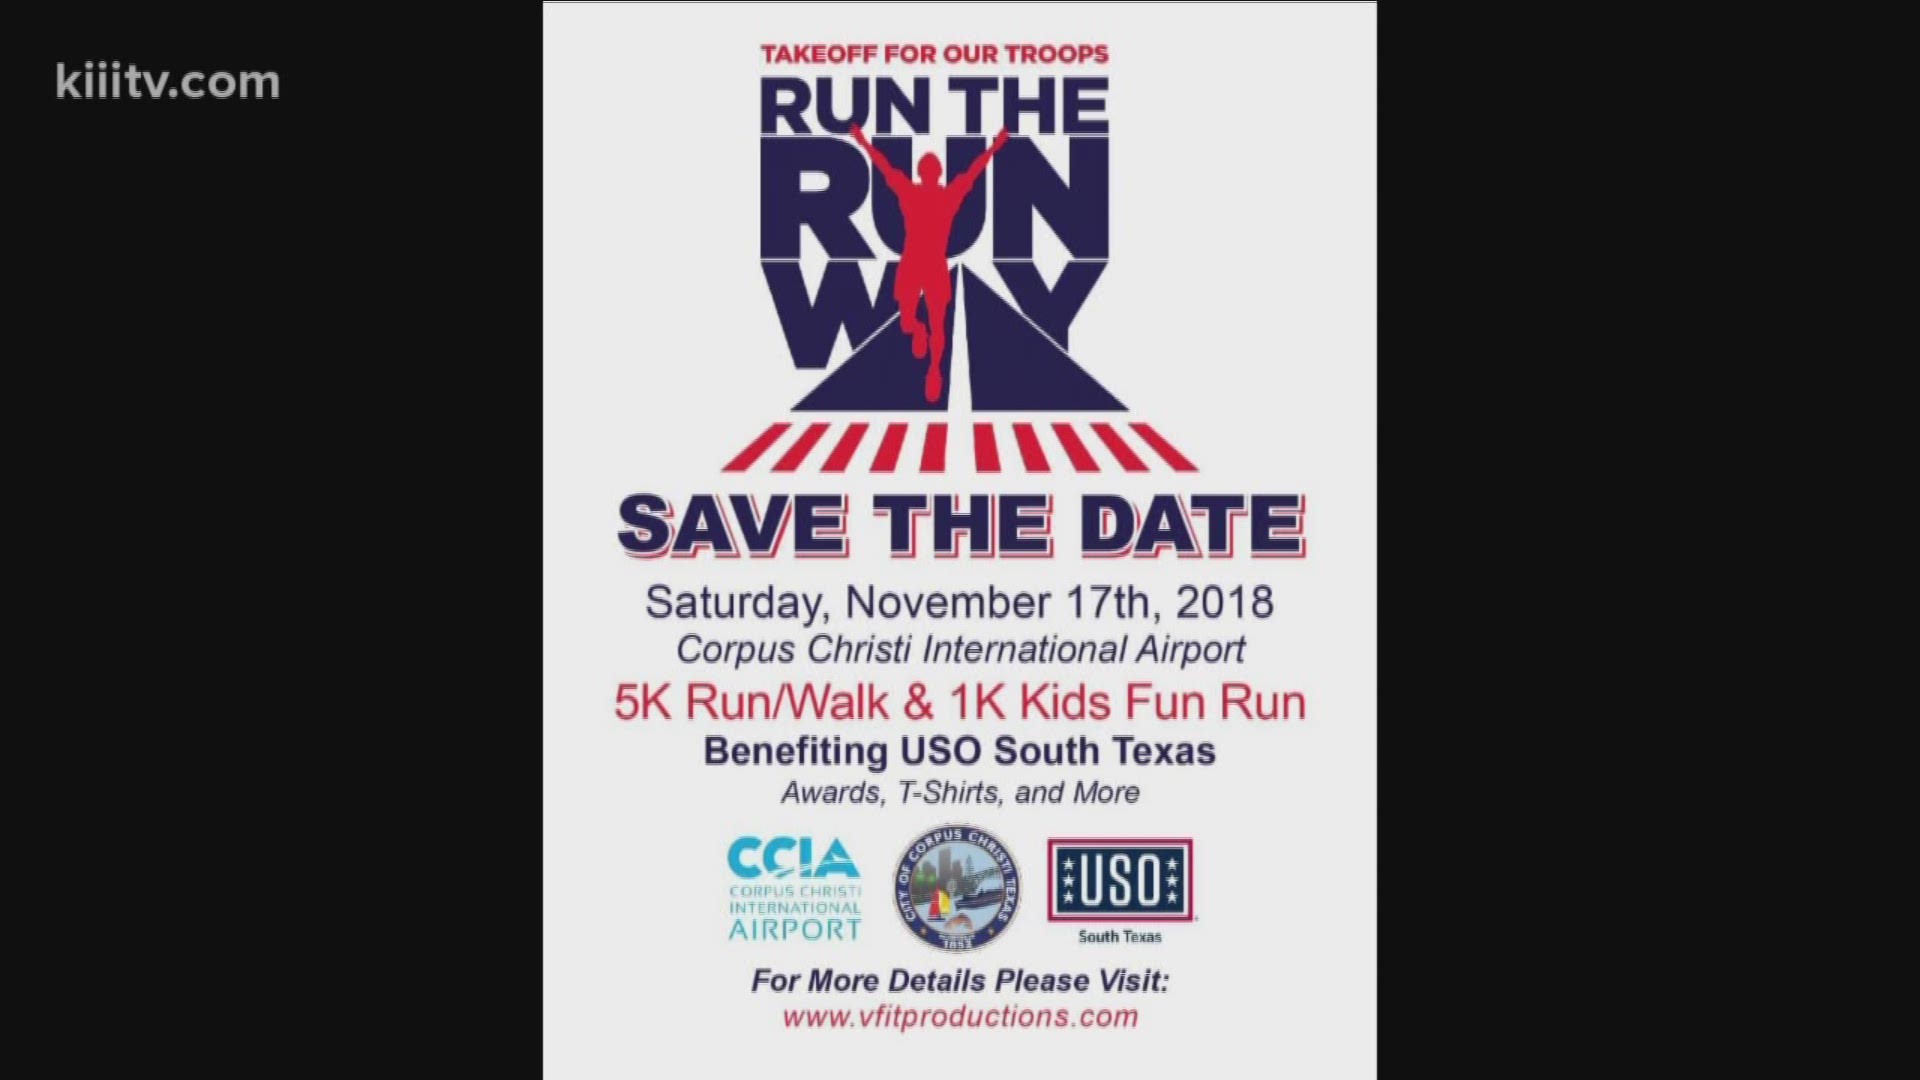 The Corpus Christi International Airport is looking to help the USO of South Texas by hosting a fun run November 17, 2018. Visit vfitproductions.com